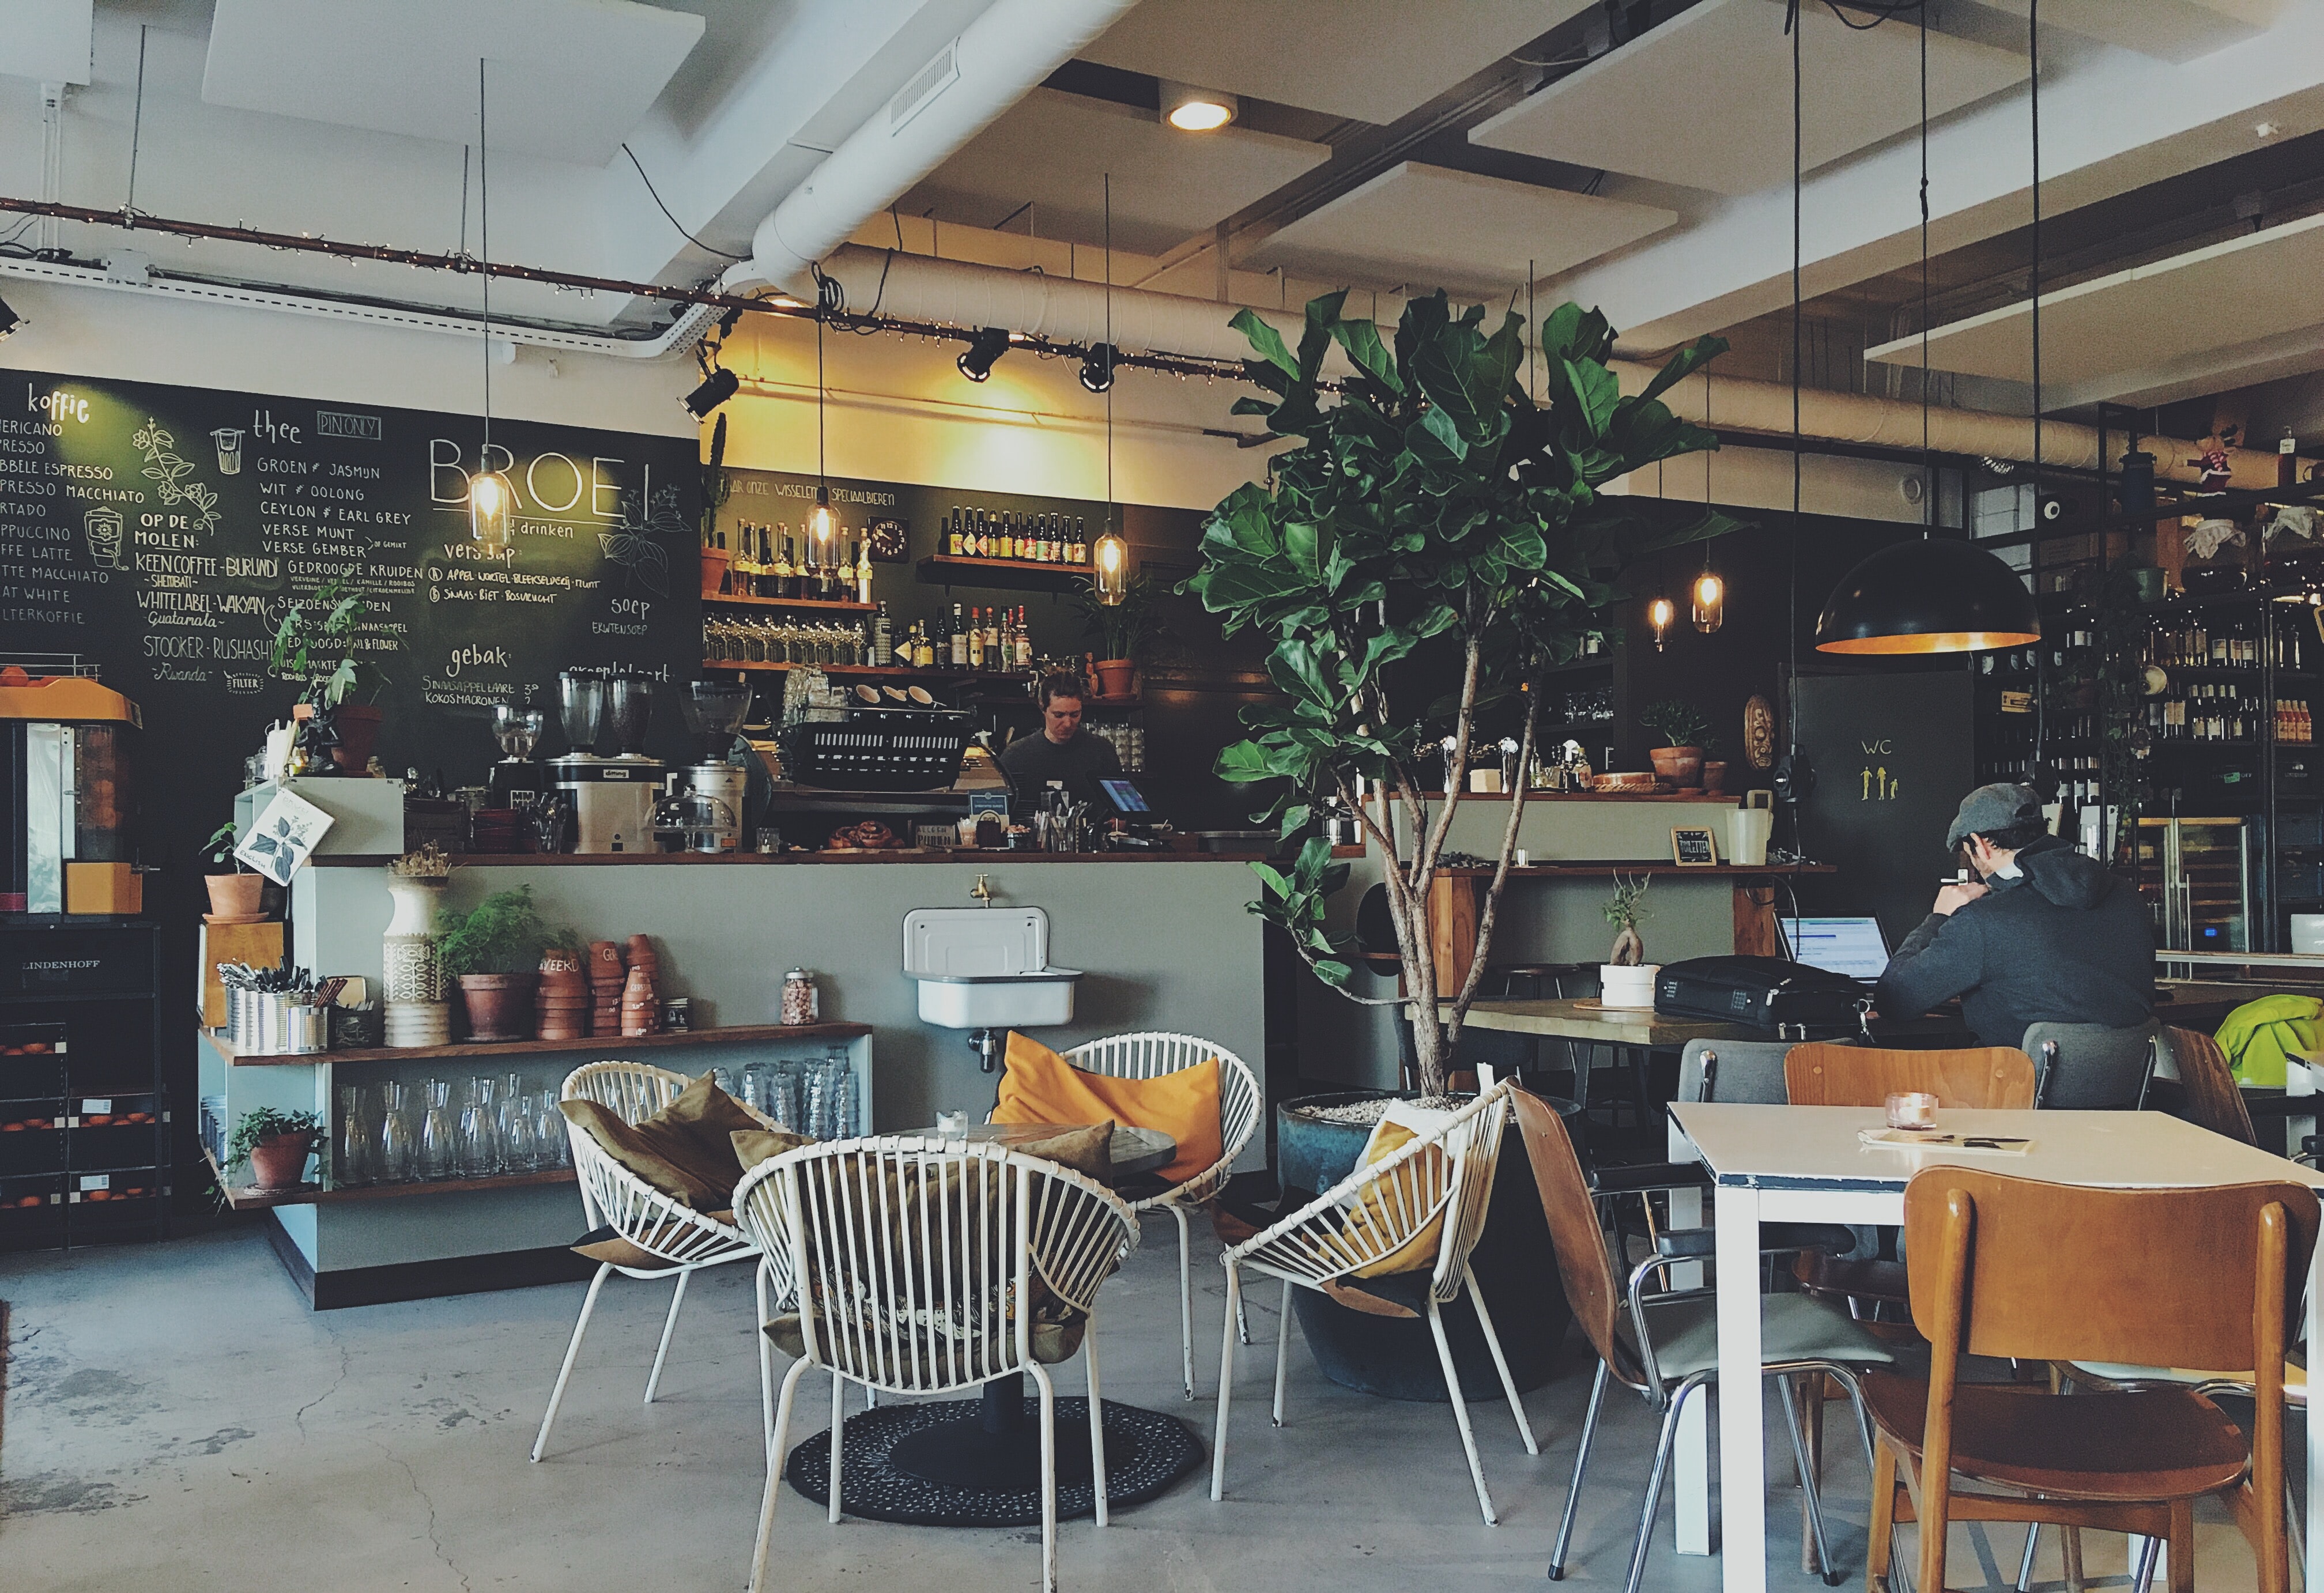 How To Make Your Independent Café Appear More Professional